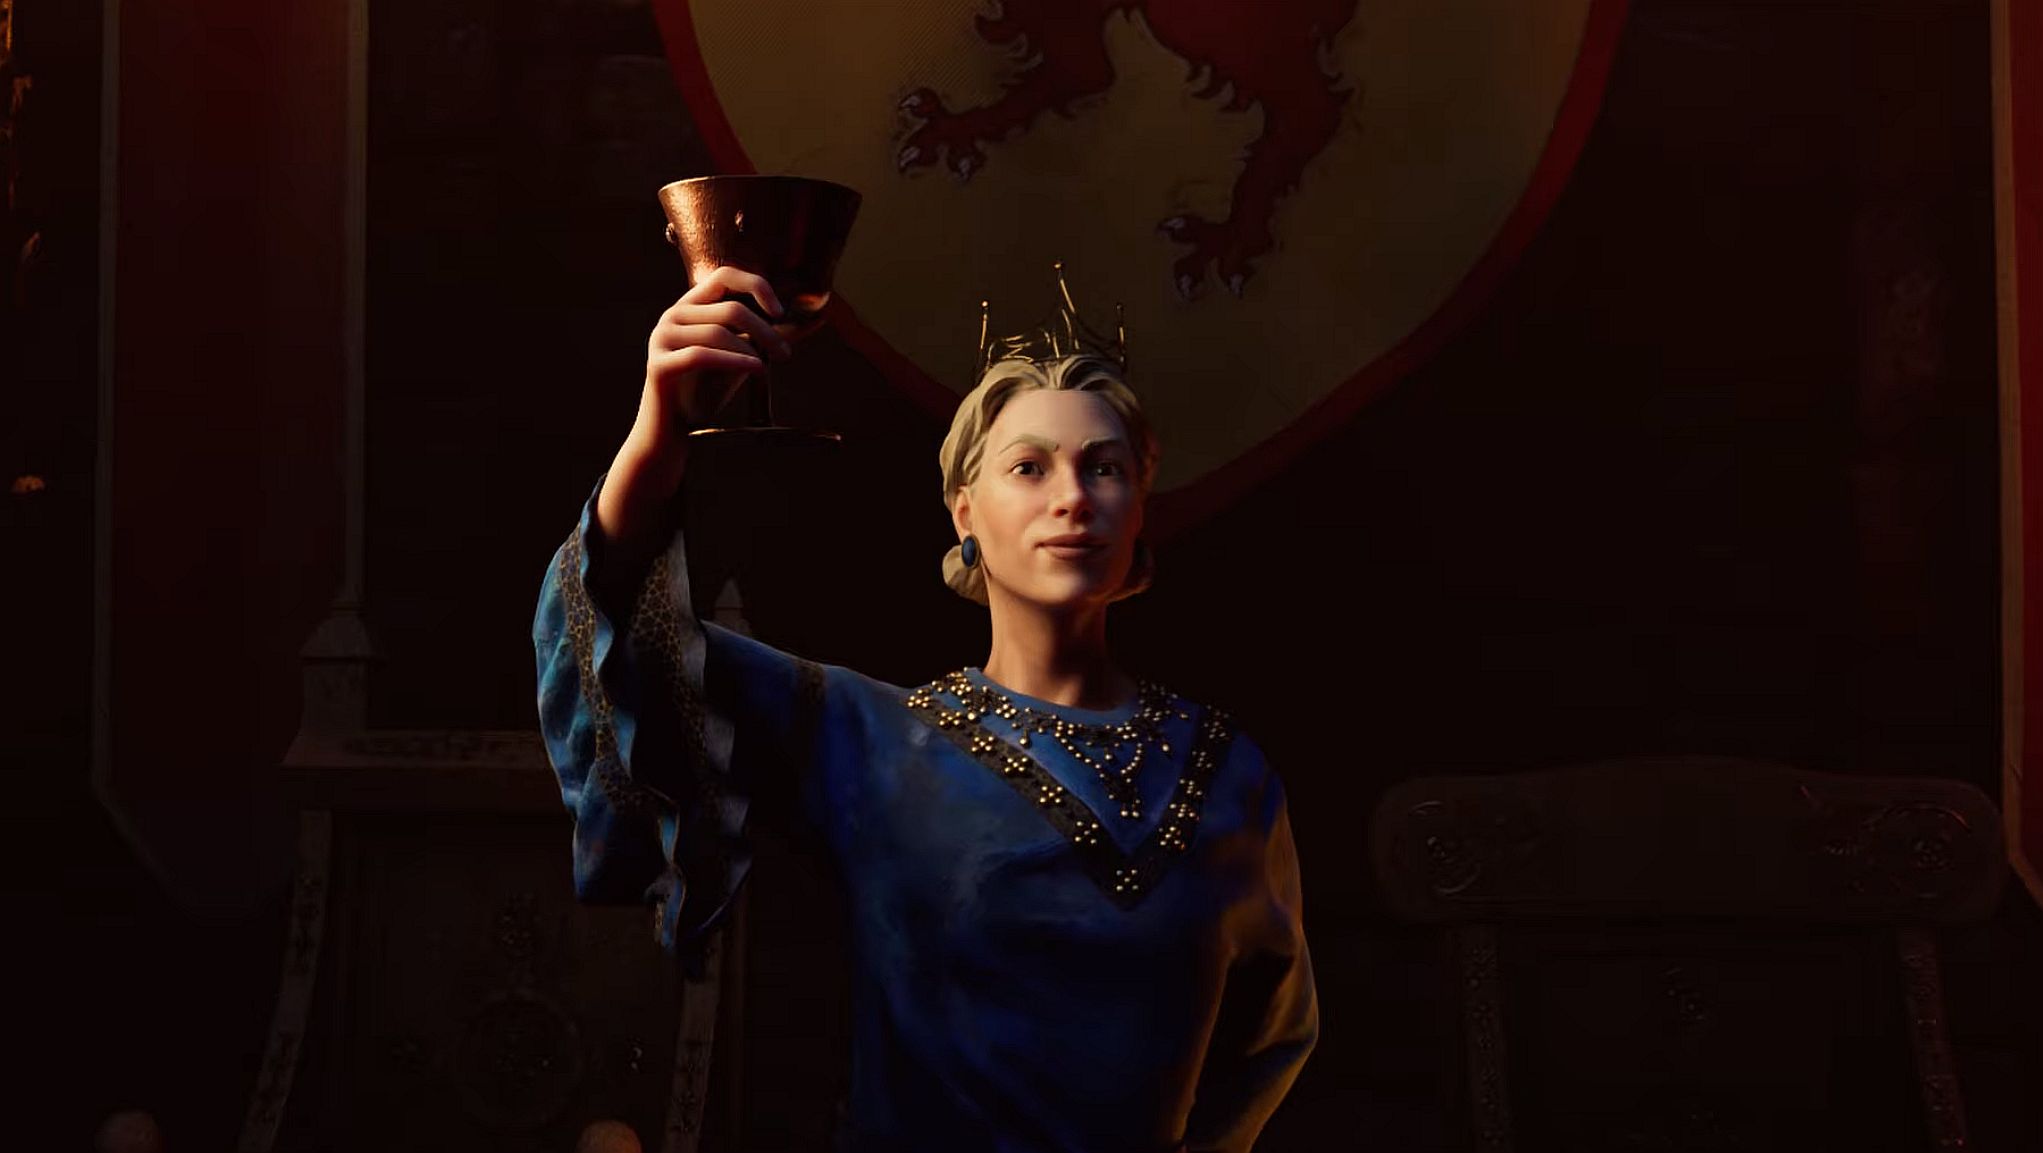 Image for Crusader Kings 3 gets its first major expansion with Royal Court